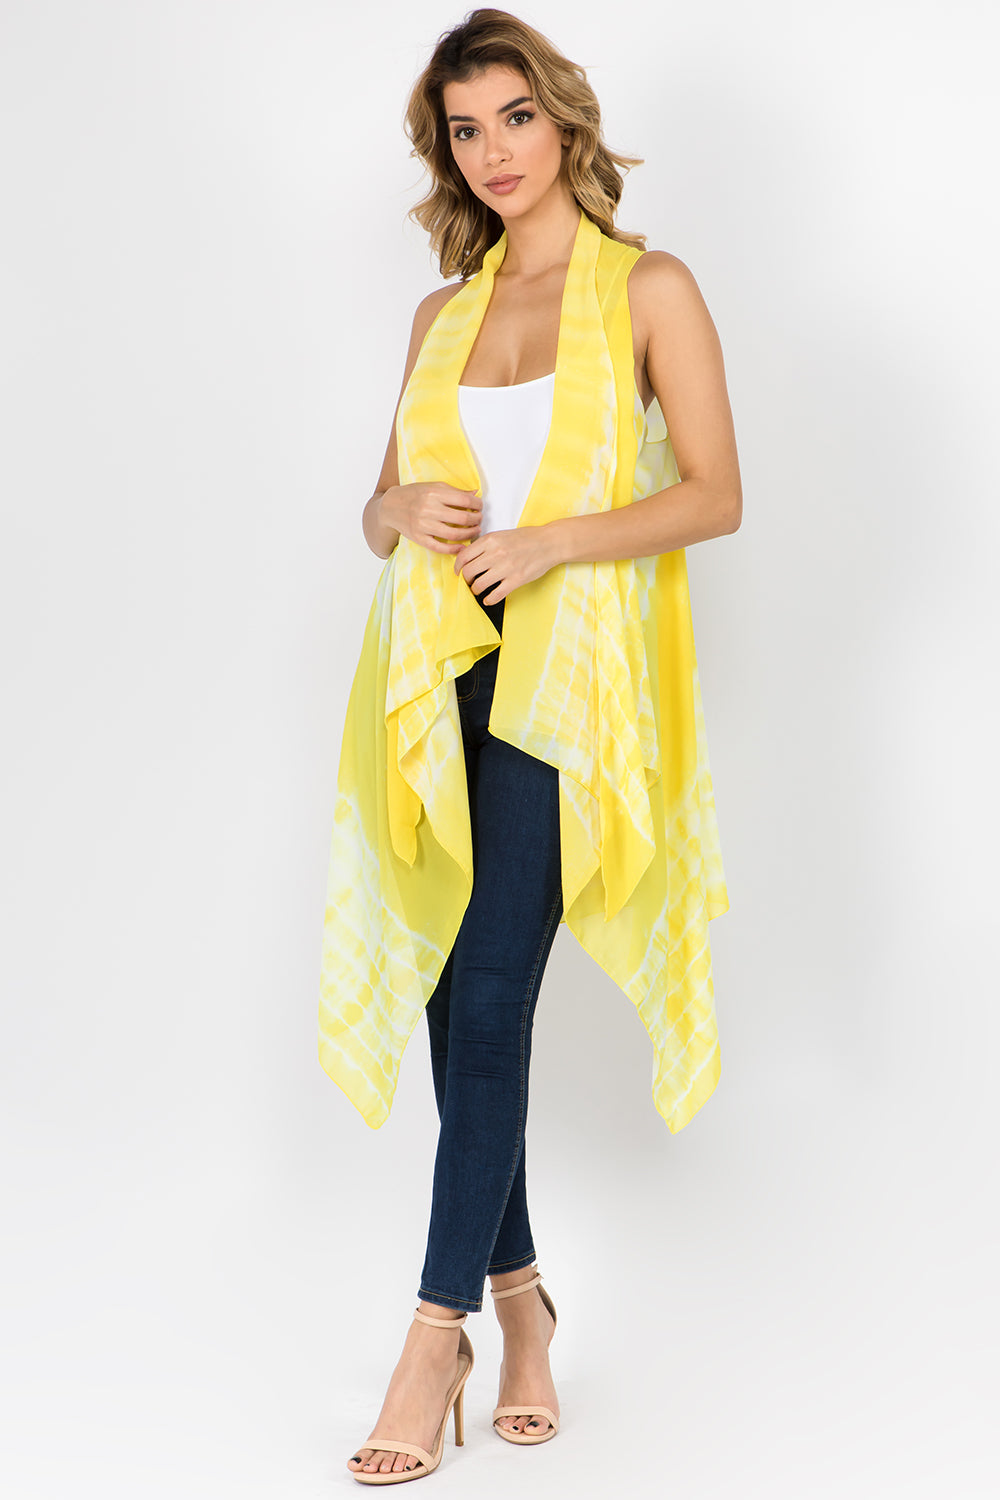 SN-97 bright color tie dyed vest